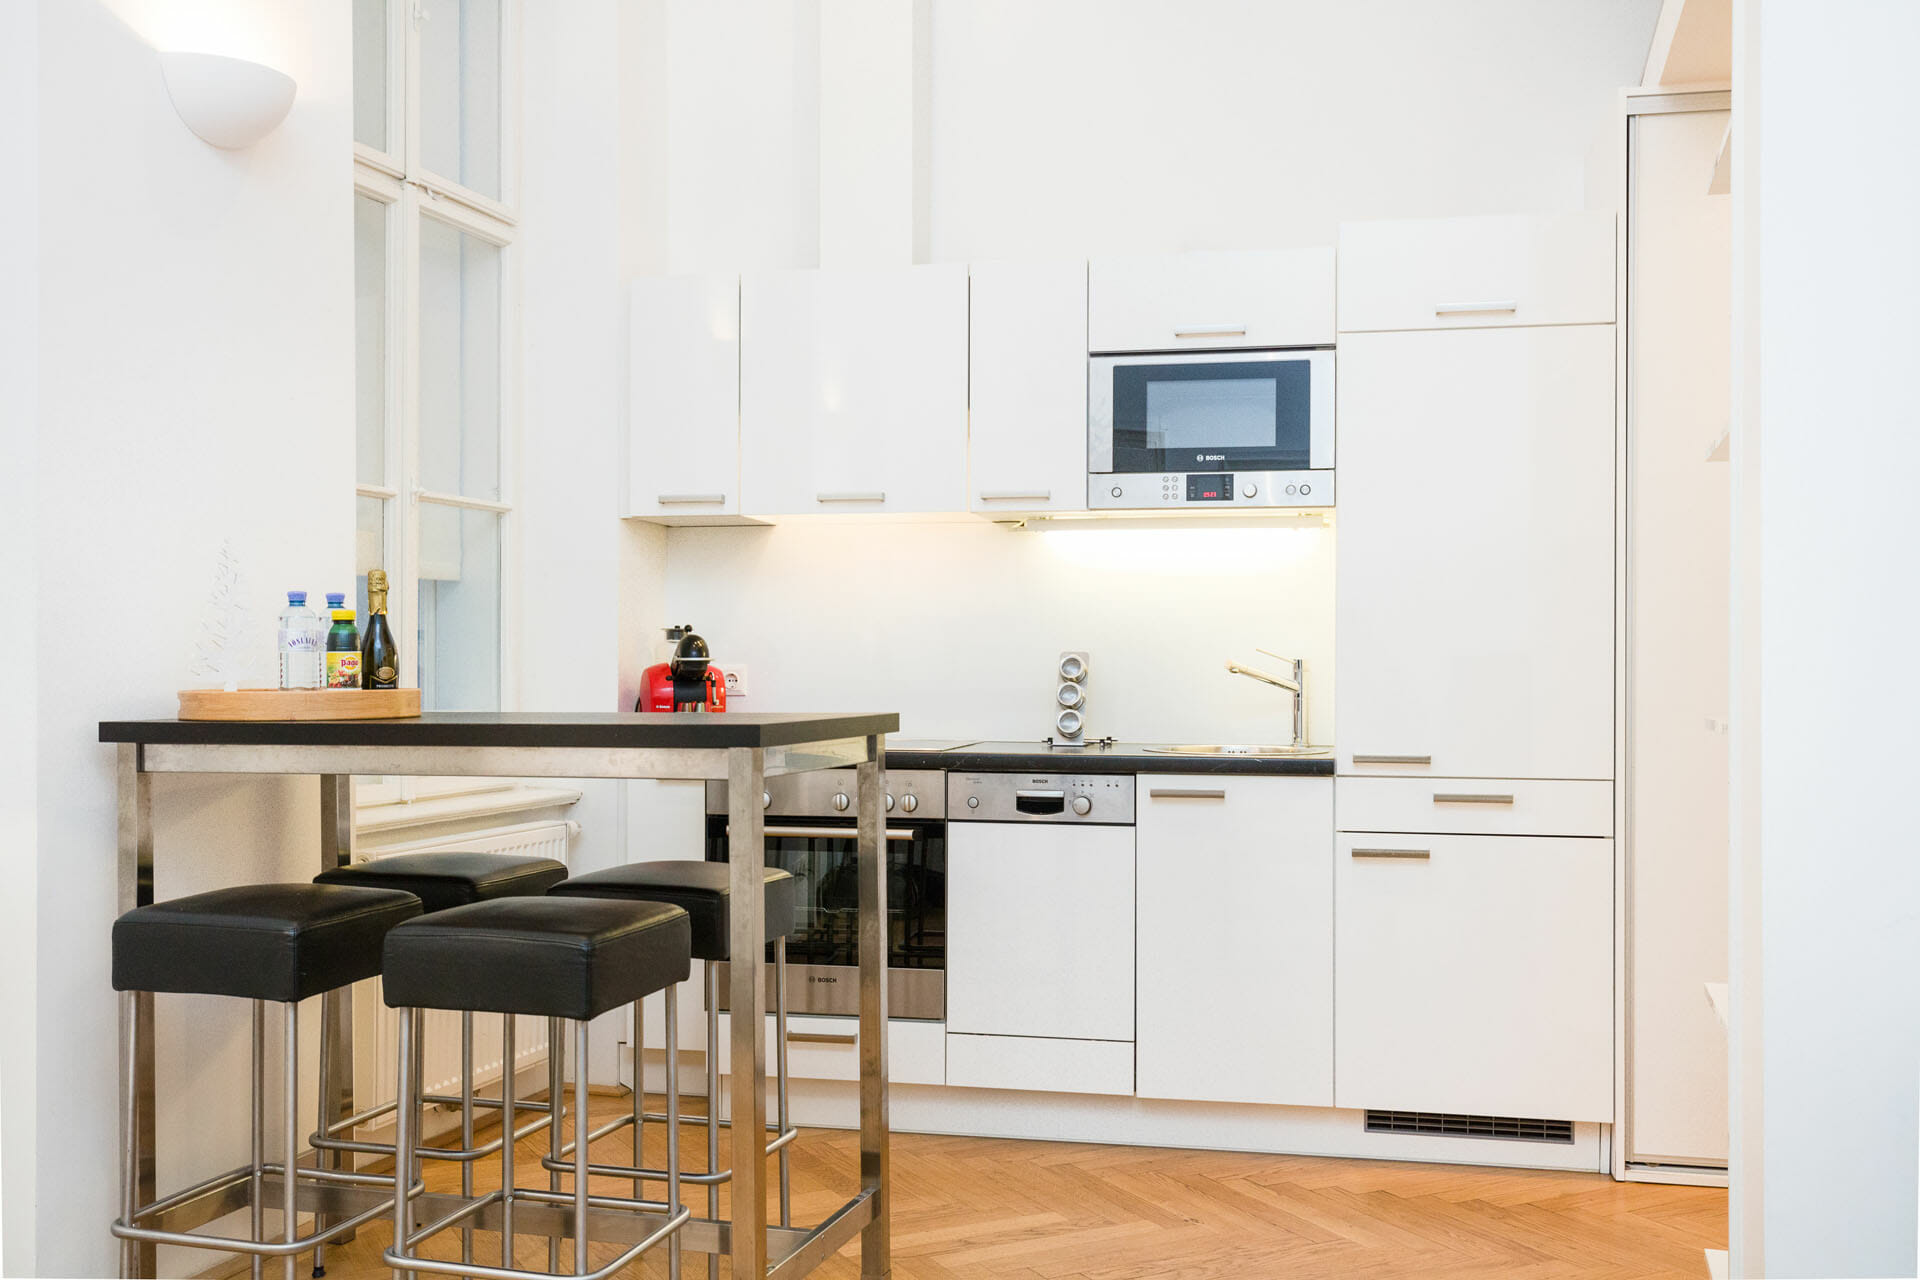 Prestige Apartments in Vienna. Ideal city center of Vienna the Graben.The apartment is fully furnished, TV, Cable, wireless, king size bed, cafe machine, wash machine and lots more. The apartment has recently been renovated and newly furnished in a modern, elegant design.